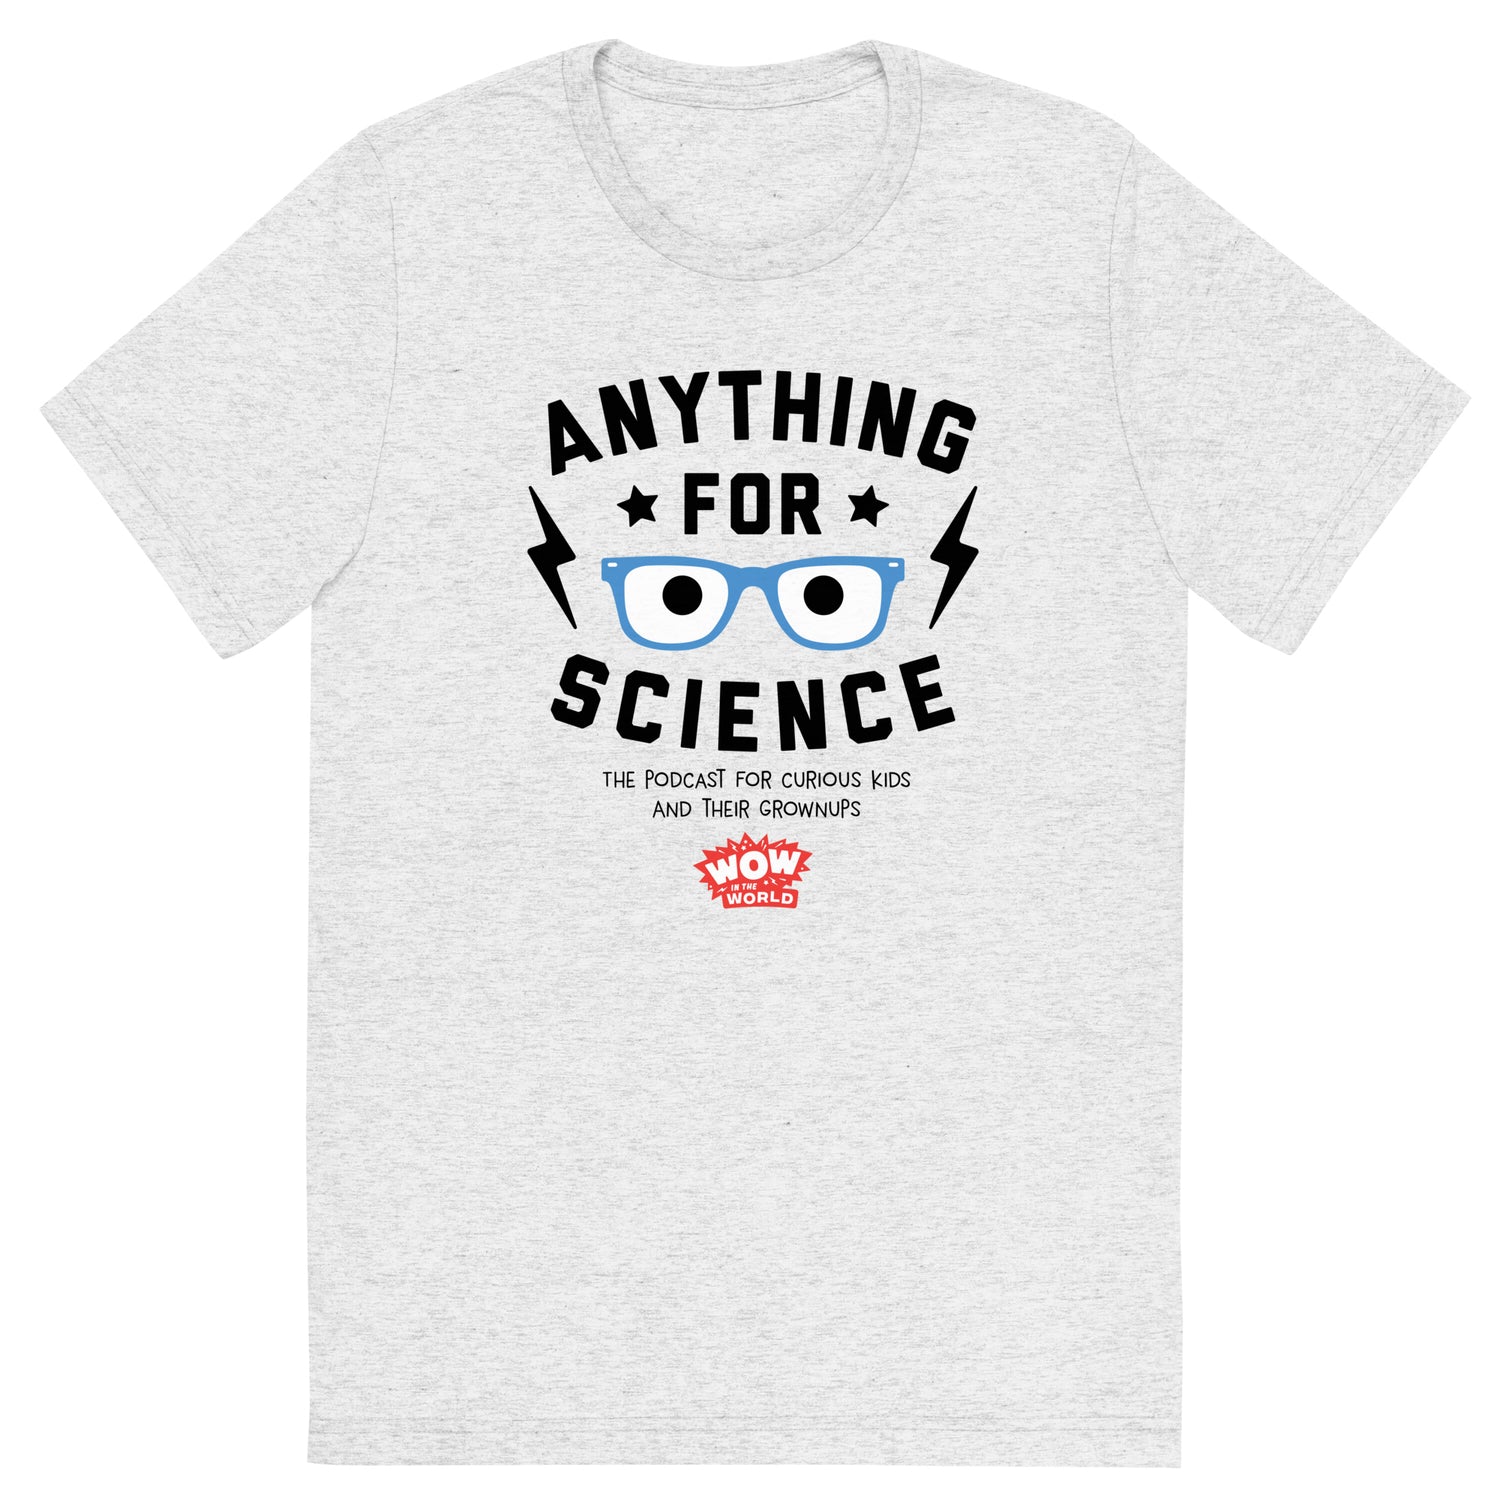 Wow in the World Anything For Science Unisex Tri-Blend T-Shirt